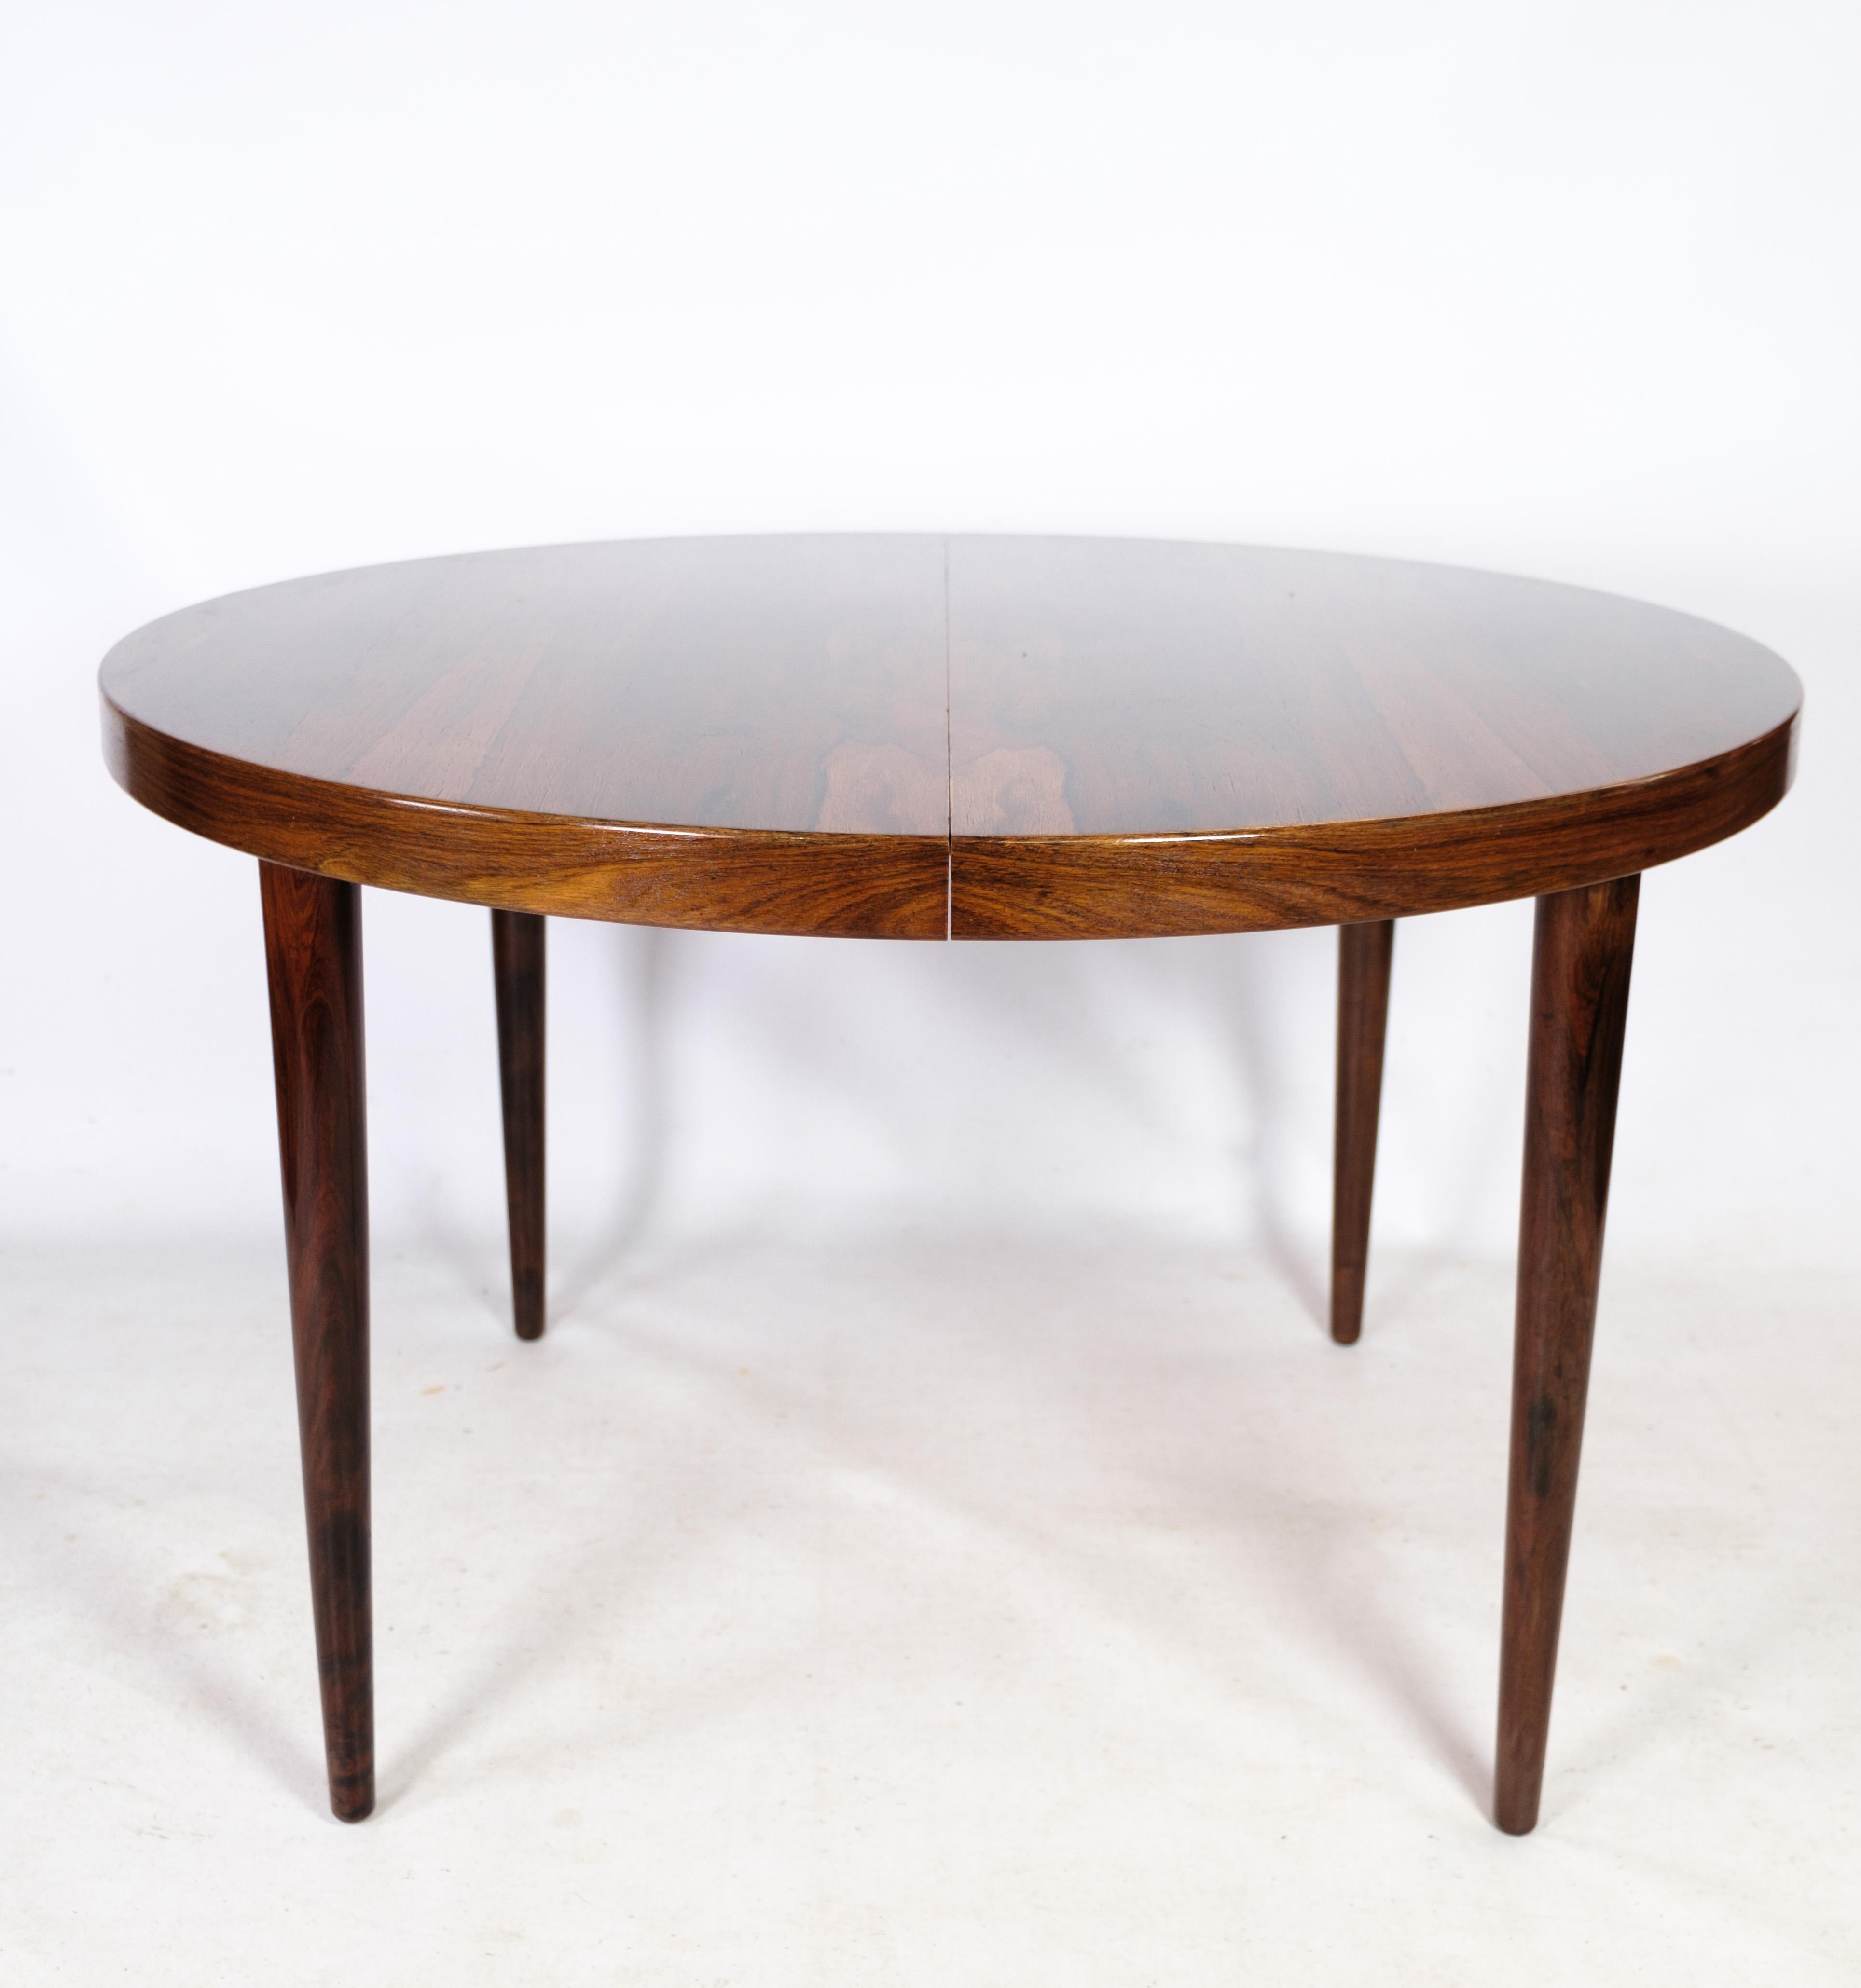 Mid-20th Century Round Dining Table, Rosewood, Omann Junior, Danish Design, 1960 For Sale